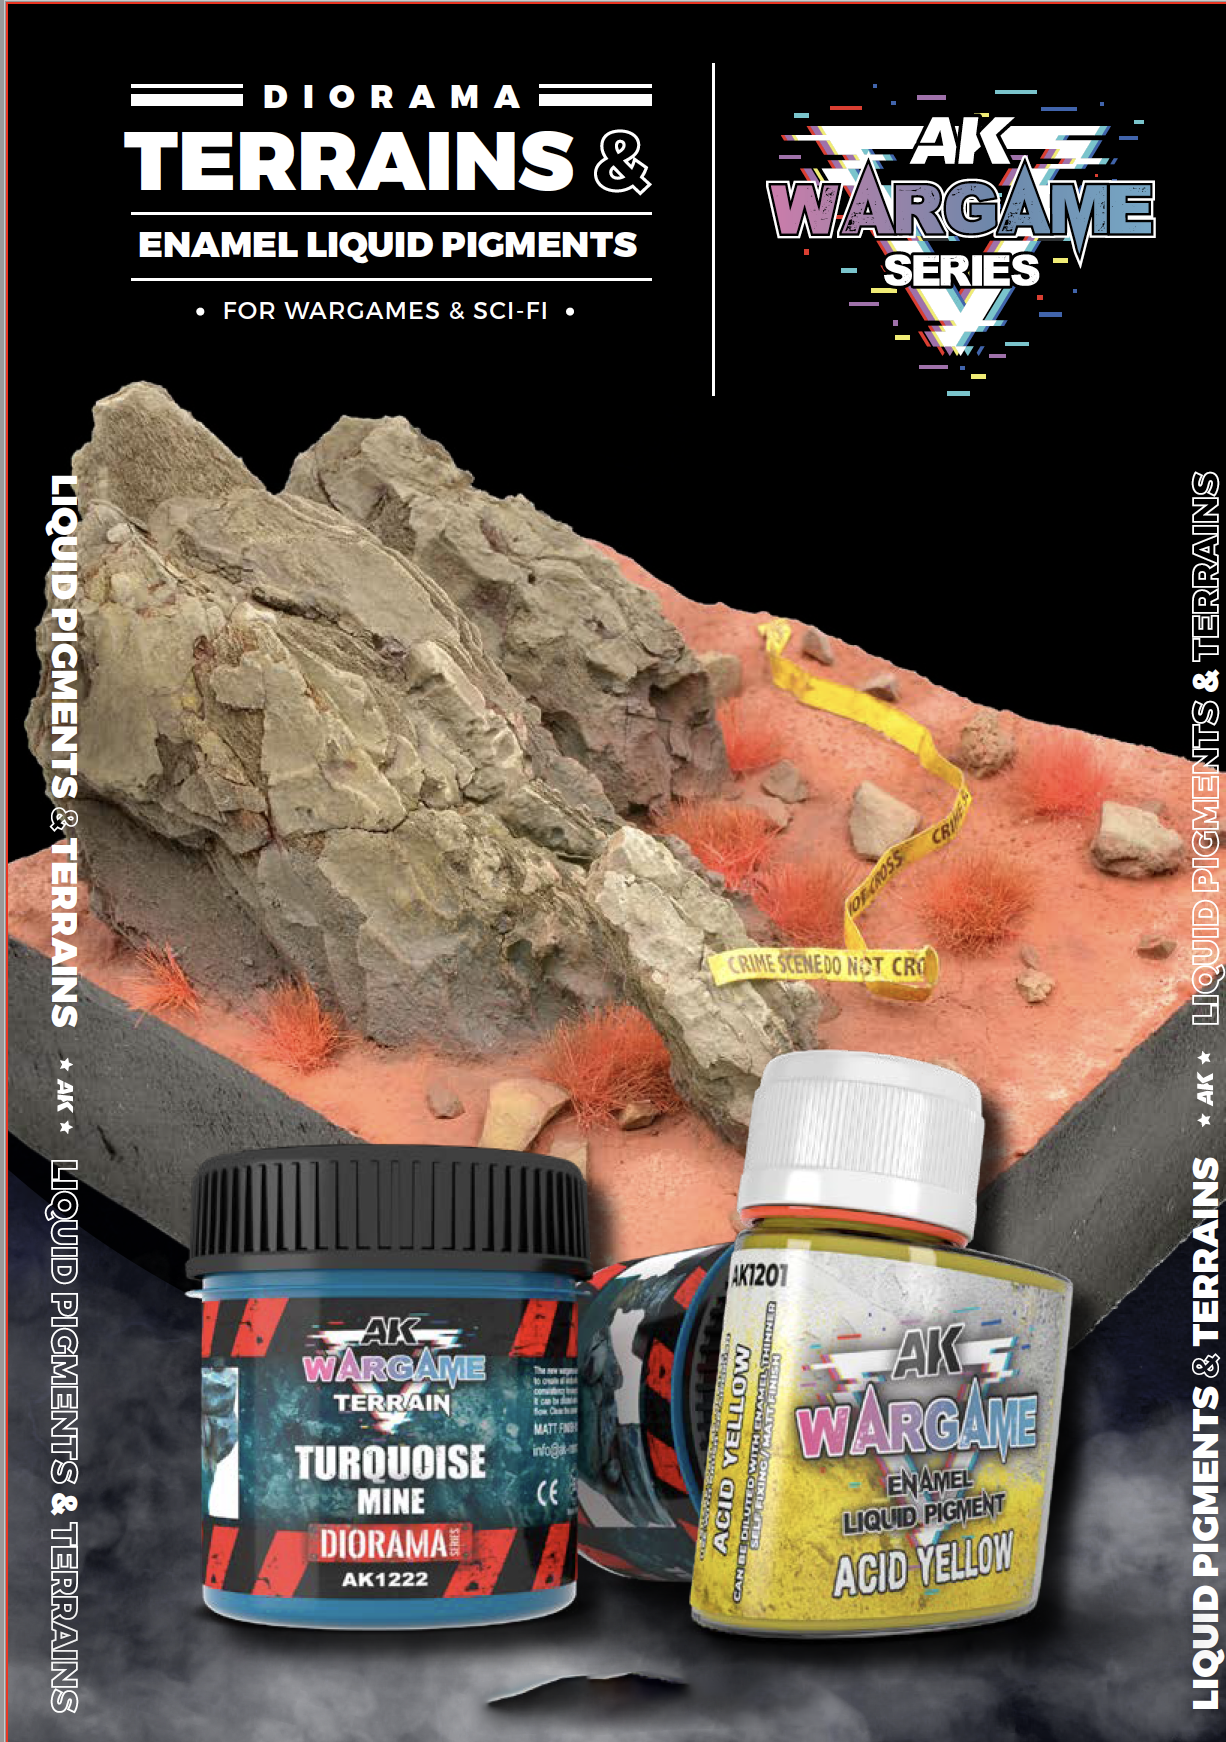 News From The Front: MichToy PRODUCT SPOTLIGHT: DIORAMA TERRAINS & ENAMEL  LIQUID PIGMENTS FOR WARGAMES & SCI-FI FROM AK INTERACTIVE